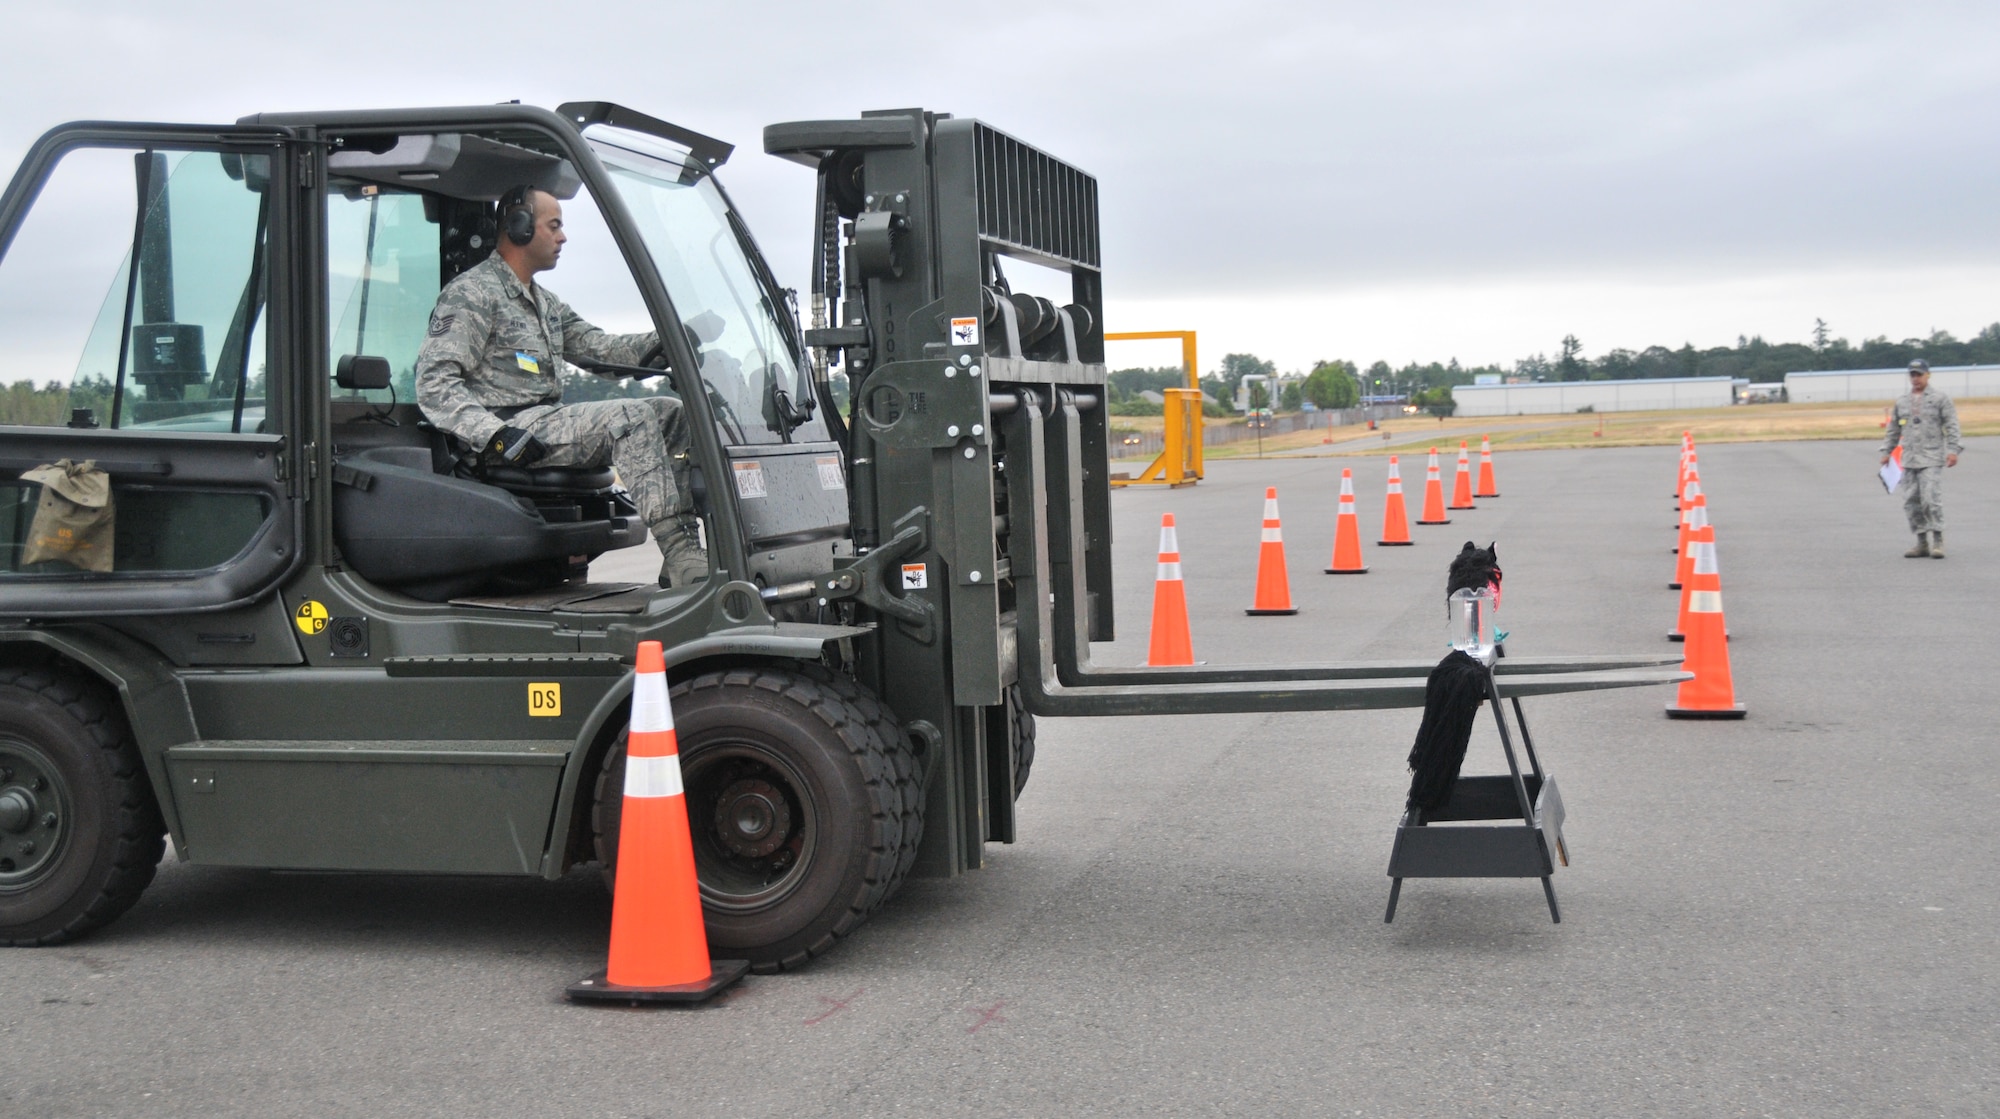 An Airman loads a wooden horse holding a pitcher of water during a forklift driving course, July 25, 2011, at Joint Base Lewis-McChord, Wash. The event was part of Air Mobility Rodeo 2011, a biennial international competition that focuses on mission readiness, featuring airdrops, aerial refueling and other events that showcase the skills of mobility crews from around the world. (U.S. Air Force photo/ Airman 1st Class Jared Trimarchi) 

